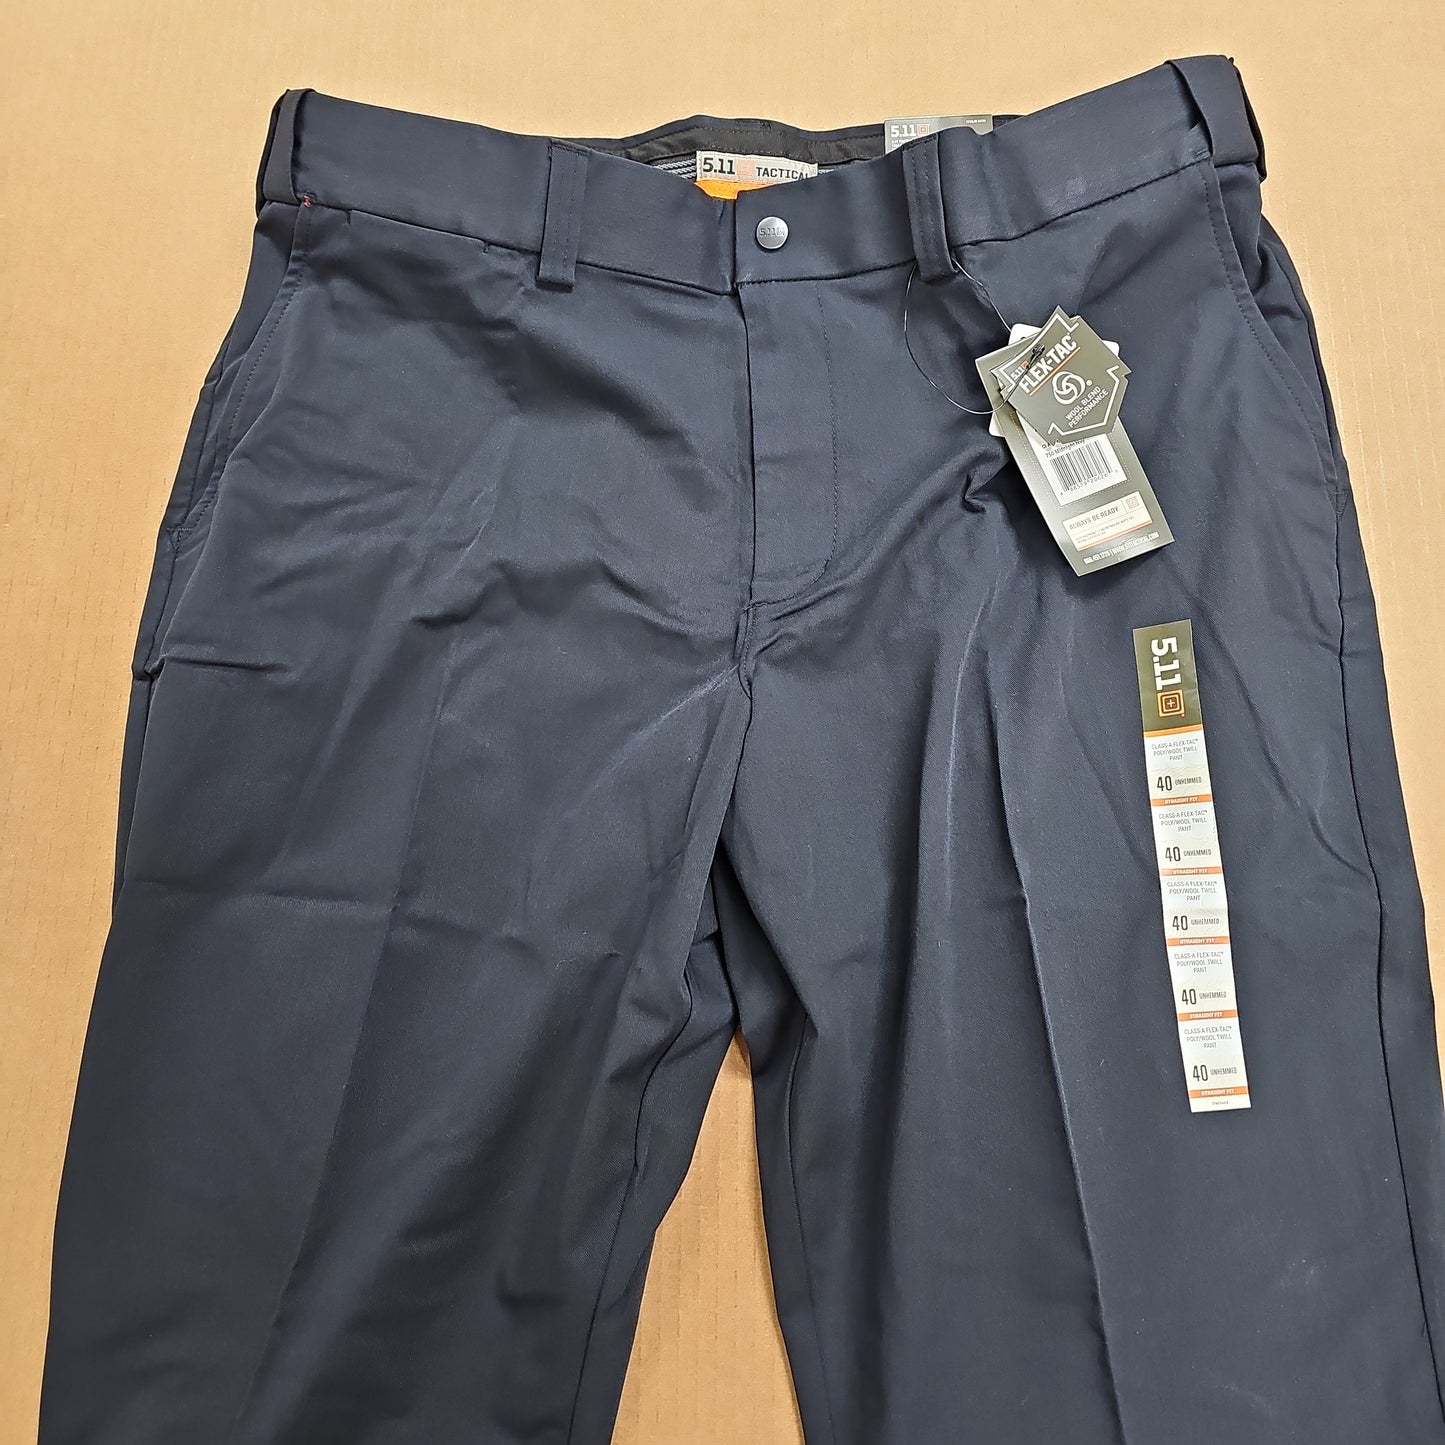 5.11 Tactical Pant: Twill, FT PW, CL-A Mid. Navy, 40 74492-750-40